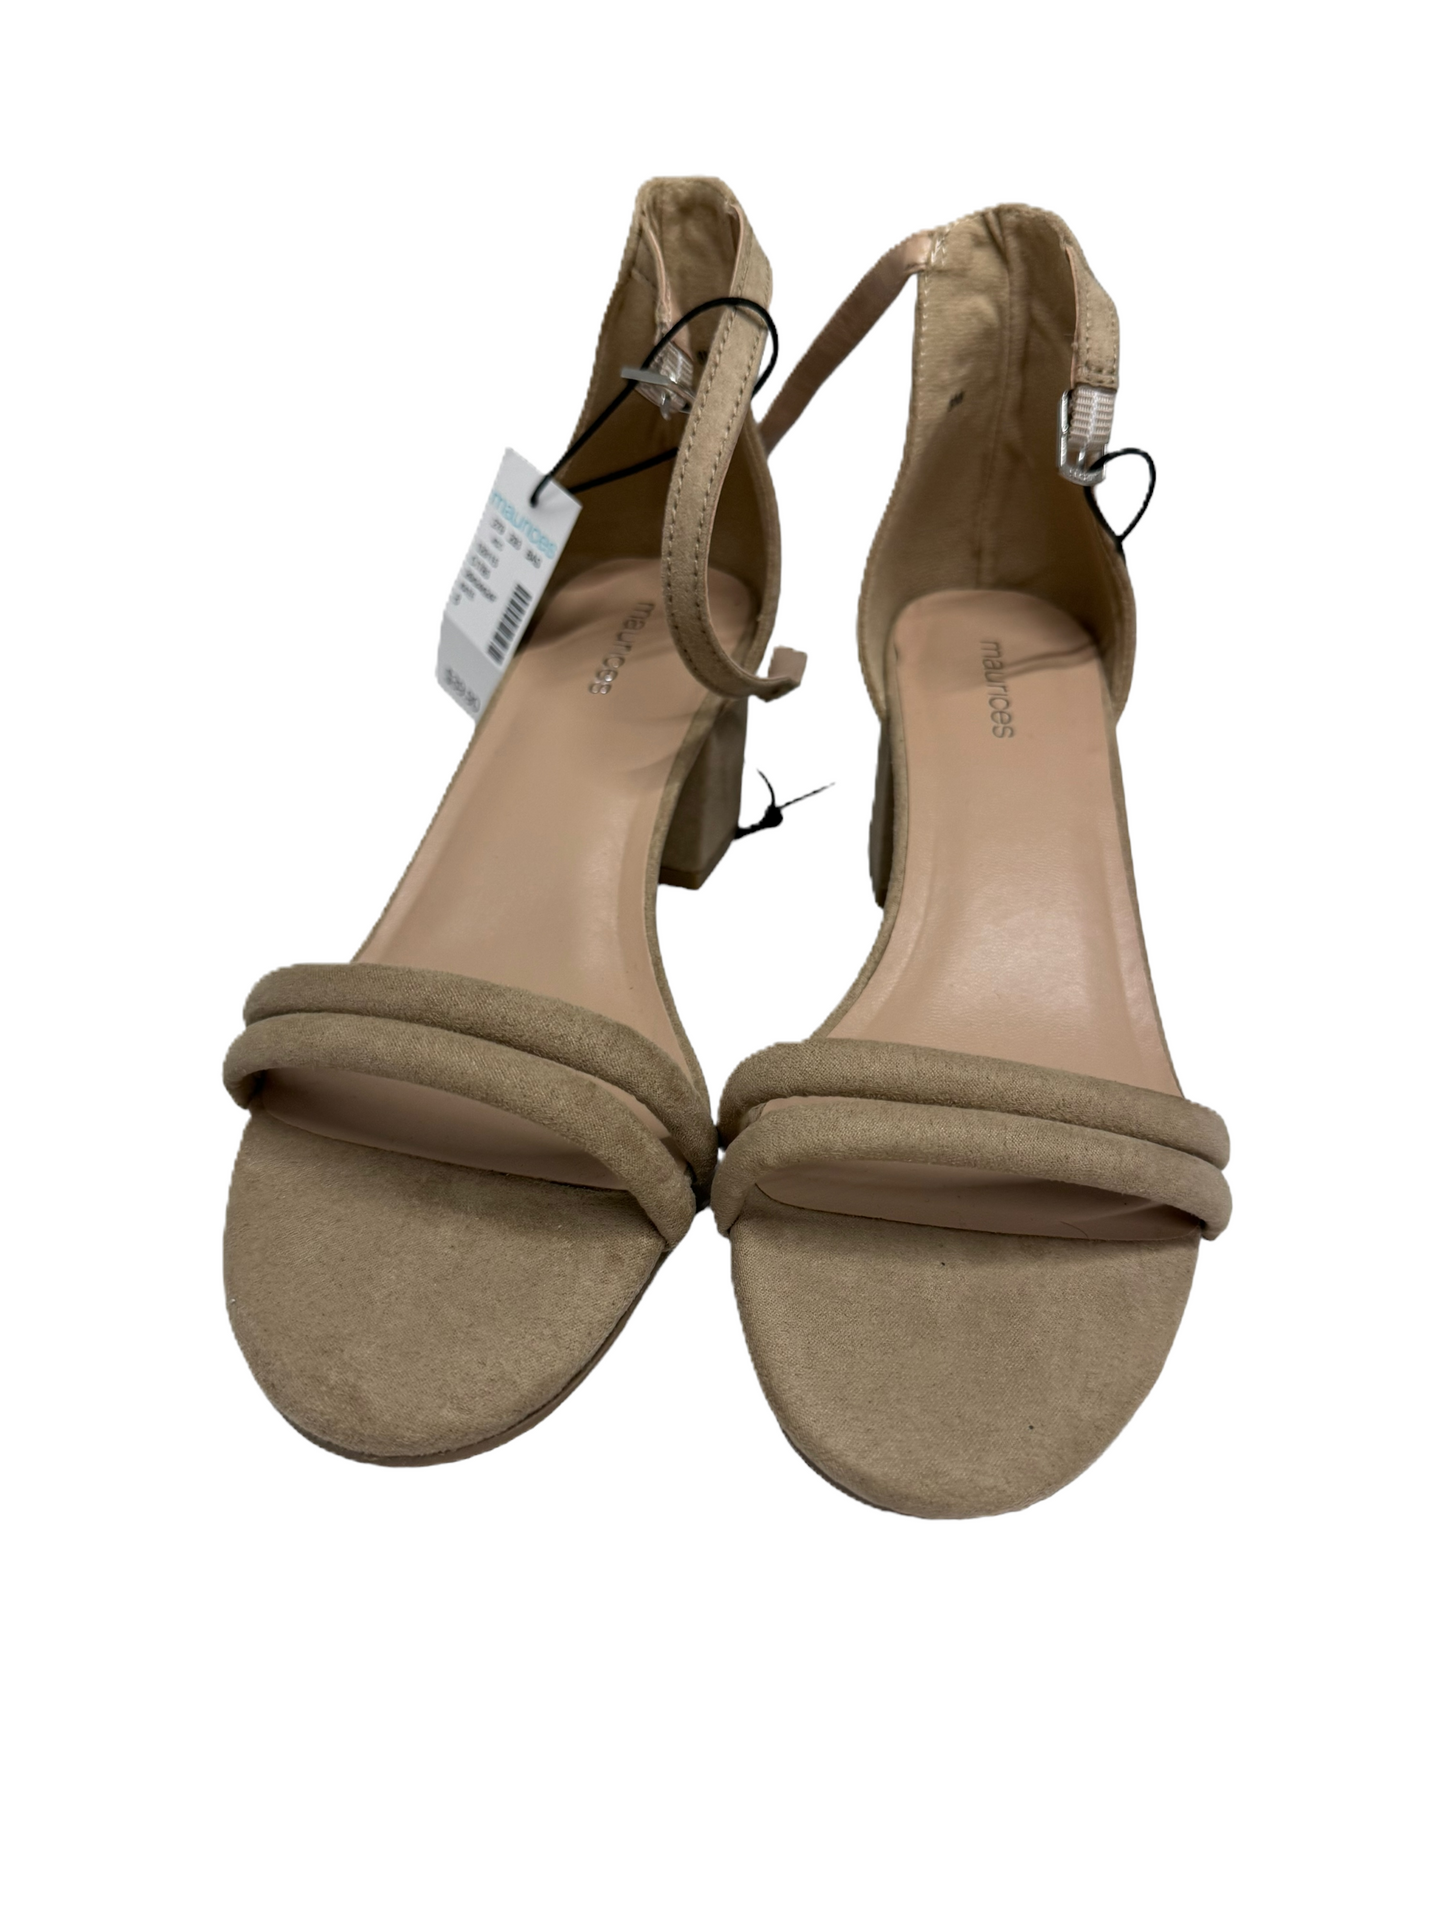 Tan Sandals Heels Block By Maurices, Size: 8